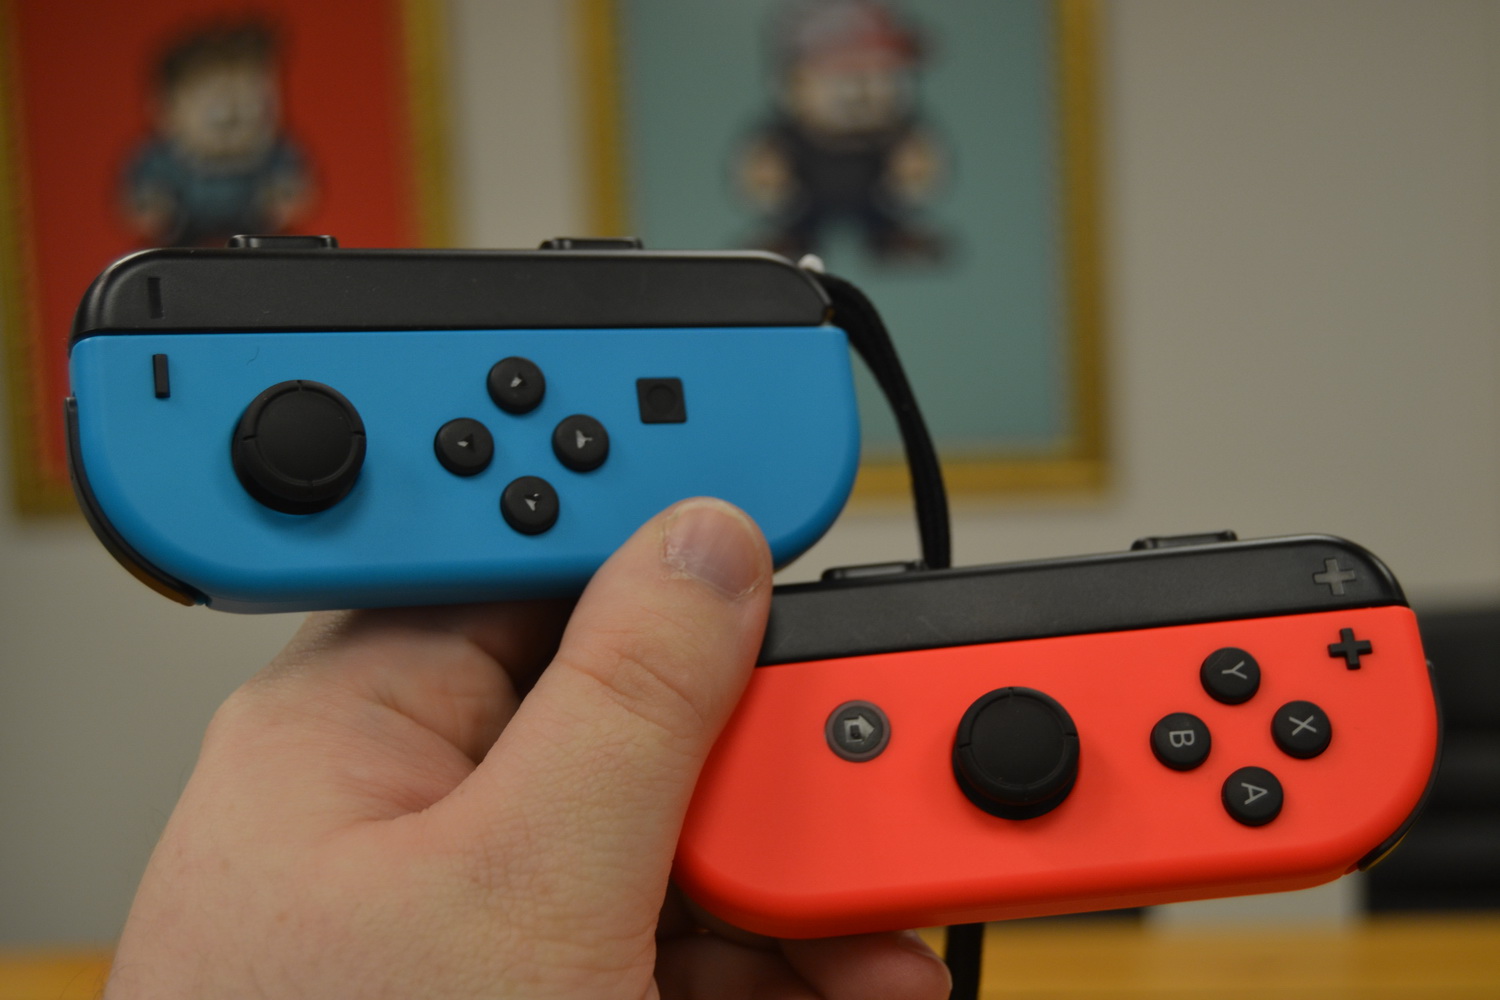 How to connect a Nintendo Switch controller to your PC or Mac